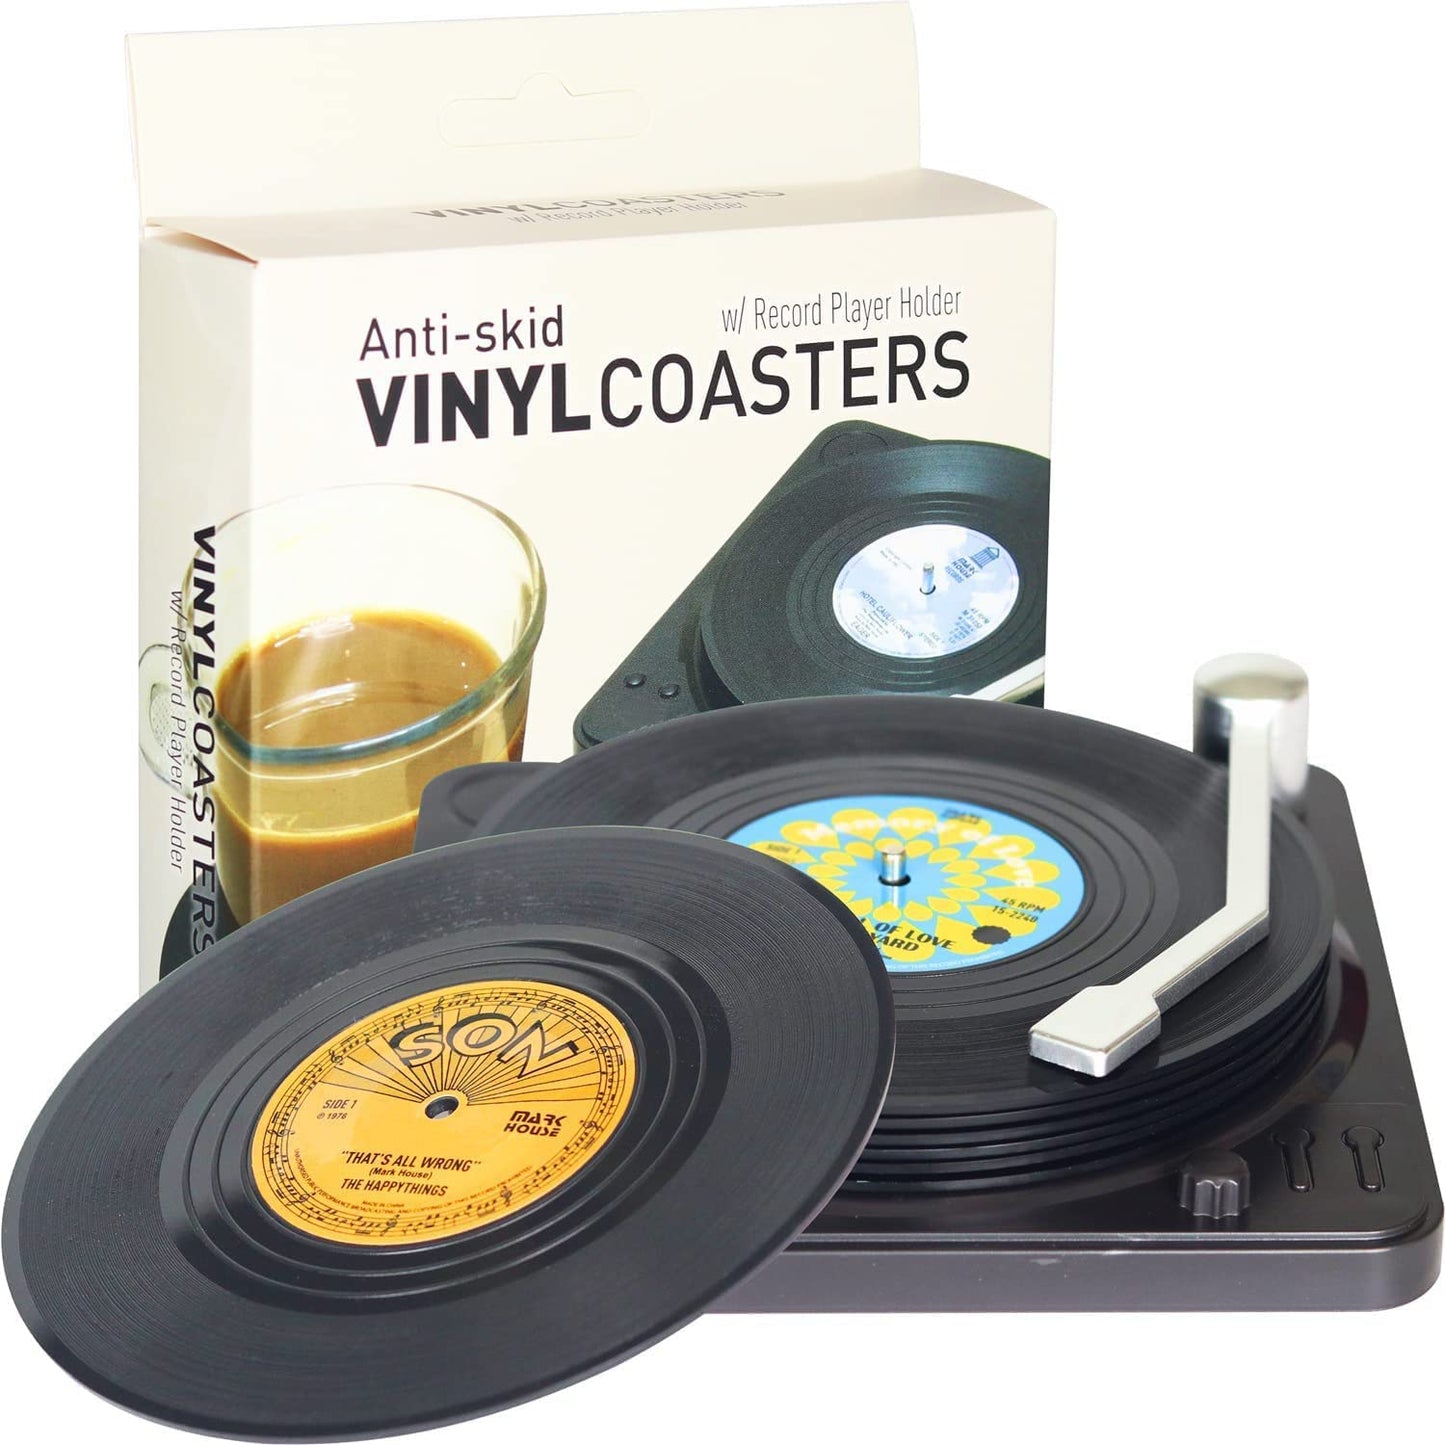 Funny Retro Vinyl Record Coasters for Drinks with Vinyl Record Player Holder for Music Lovers,Set of 6 Conversation Piece Sayings Drink Coaster,Housewarming Hostess Gifts, Wedding Registry Gift Ideas